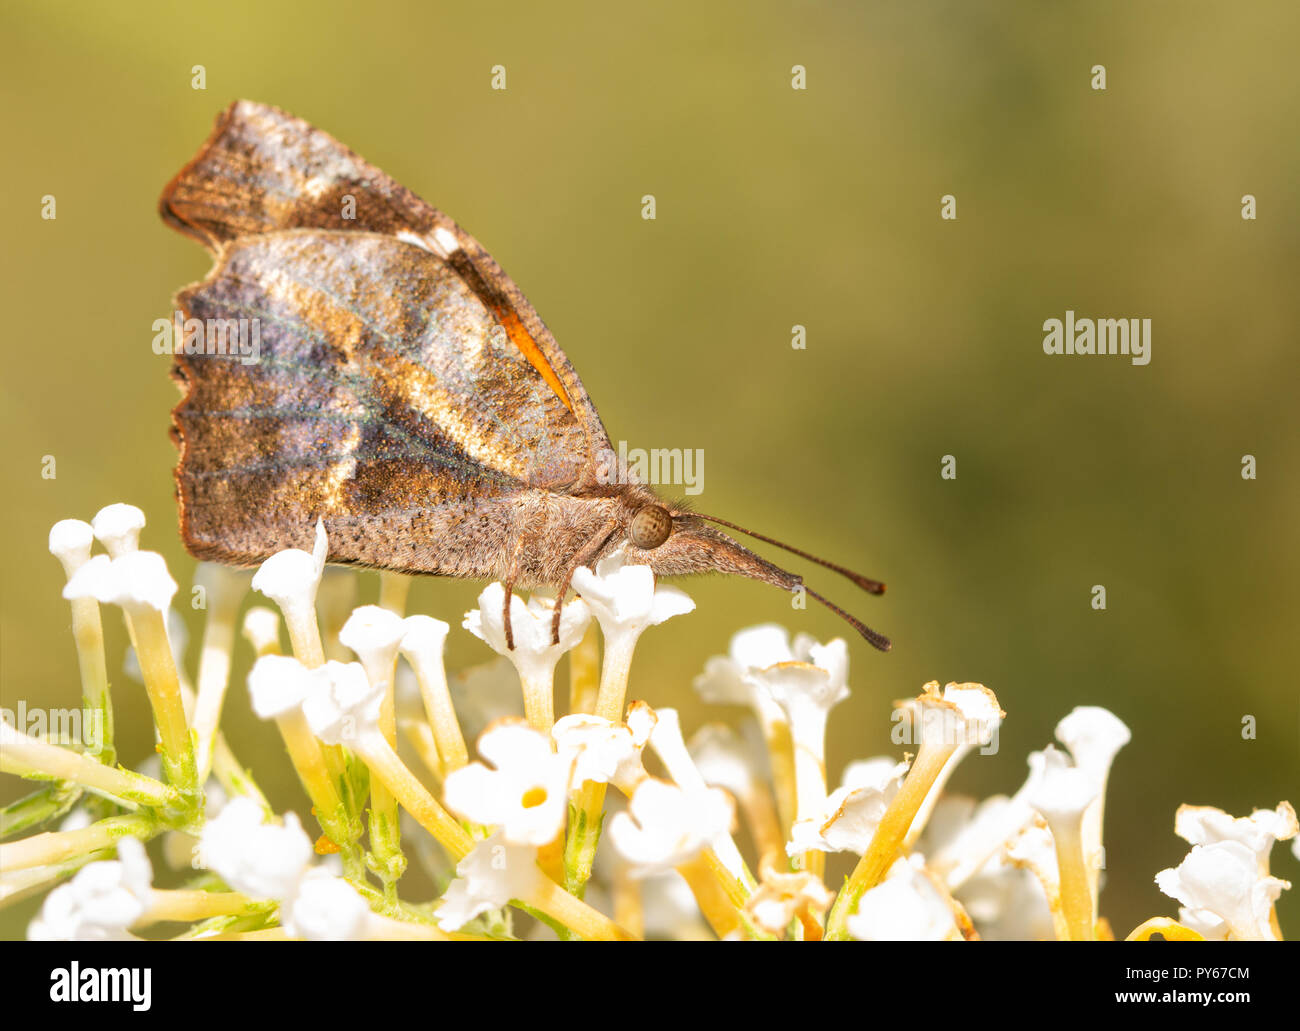 American Snout butterfly, Libytheana carinenta feeding on a white flower cluster of Buddleia Stock Photo